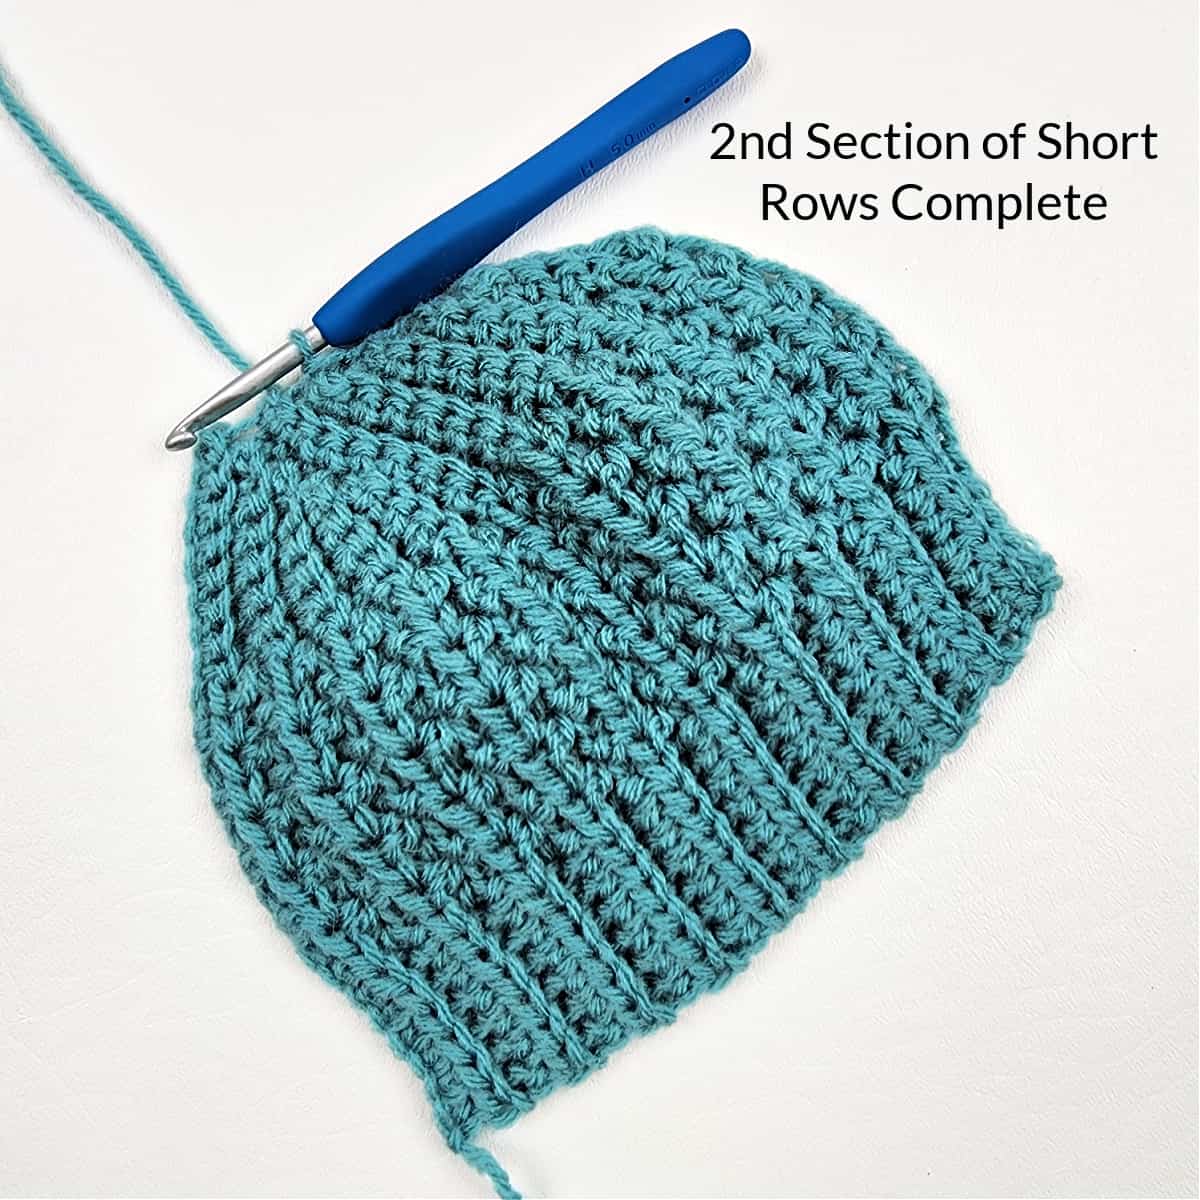 Two short row sections complete on a green crochet hat.